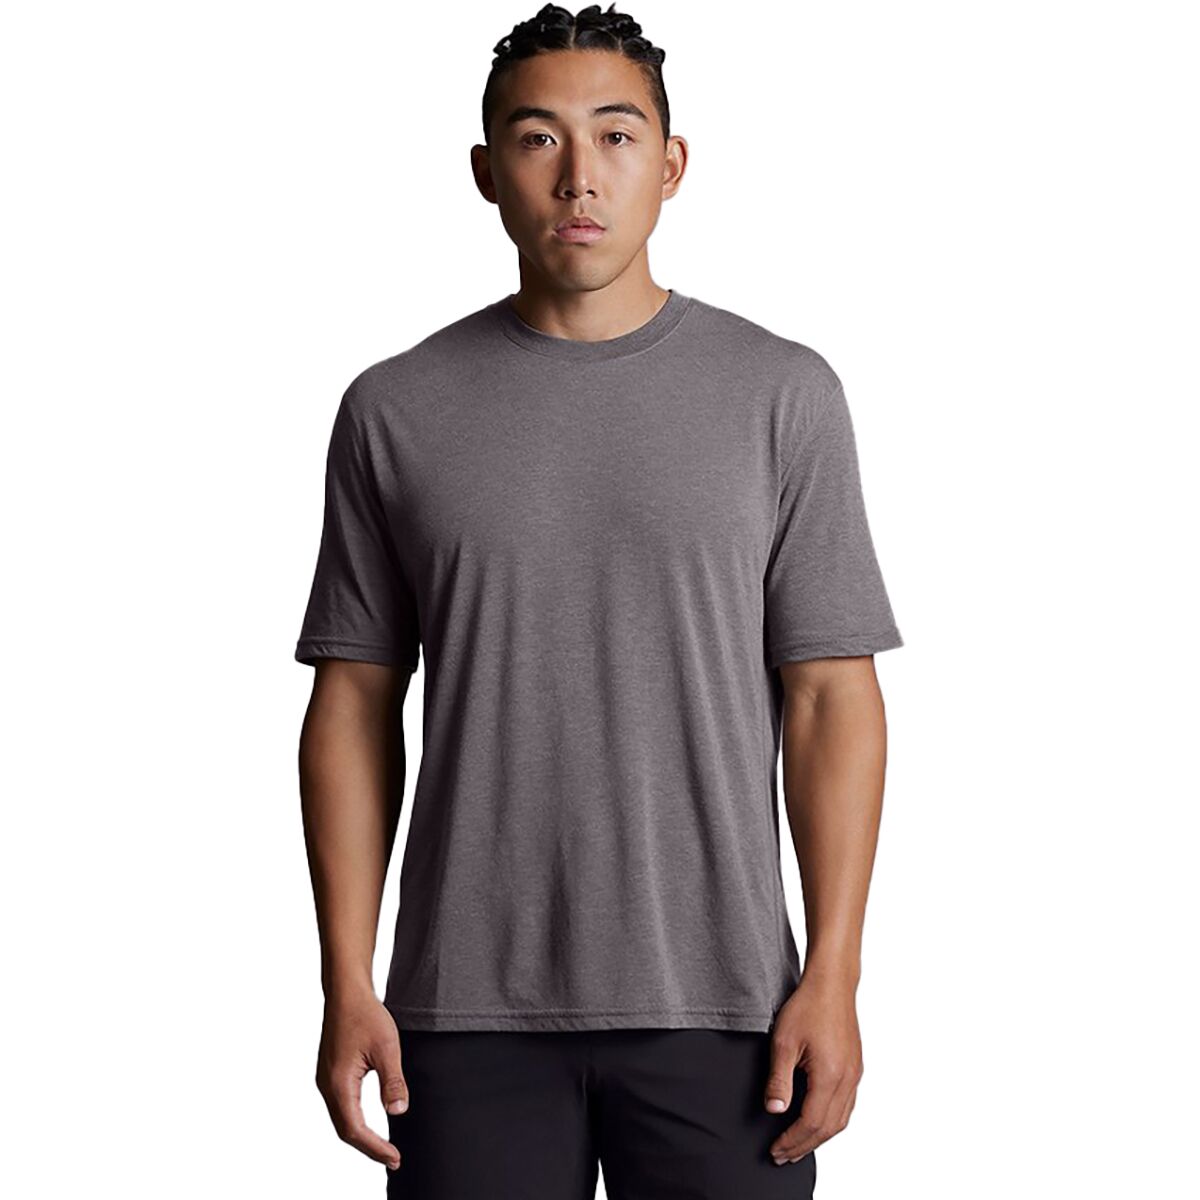 PNW Components Ozone Trail Jersey - Men's